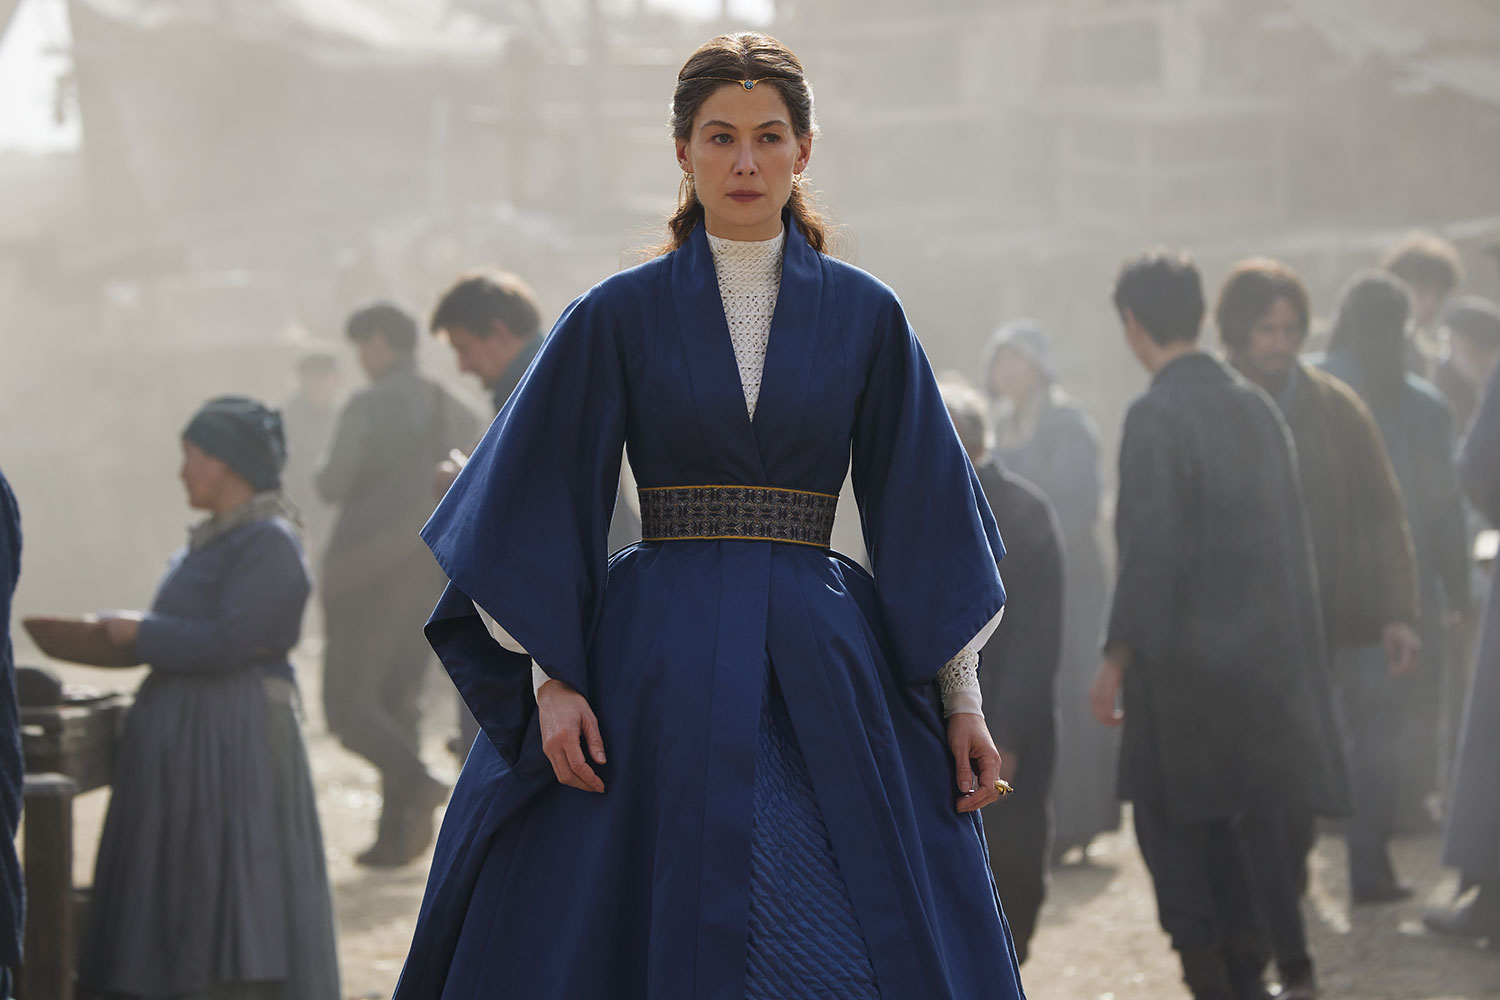 Rosamund Pike as Moiraine in 'The Wheel of Time' season 2